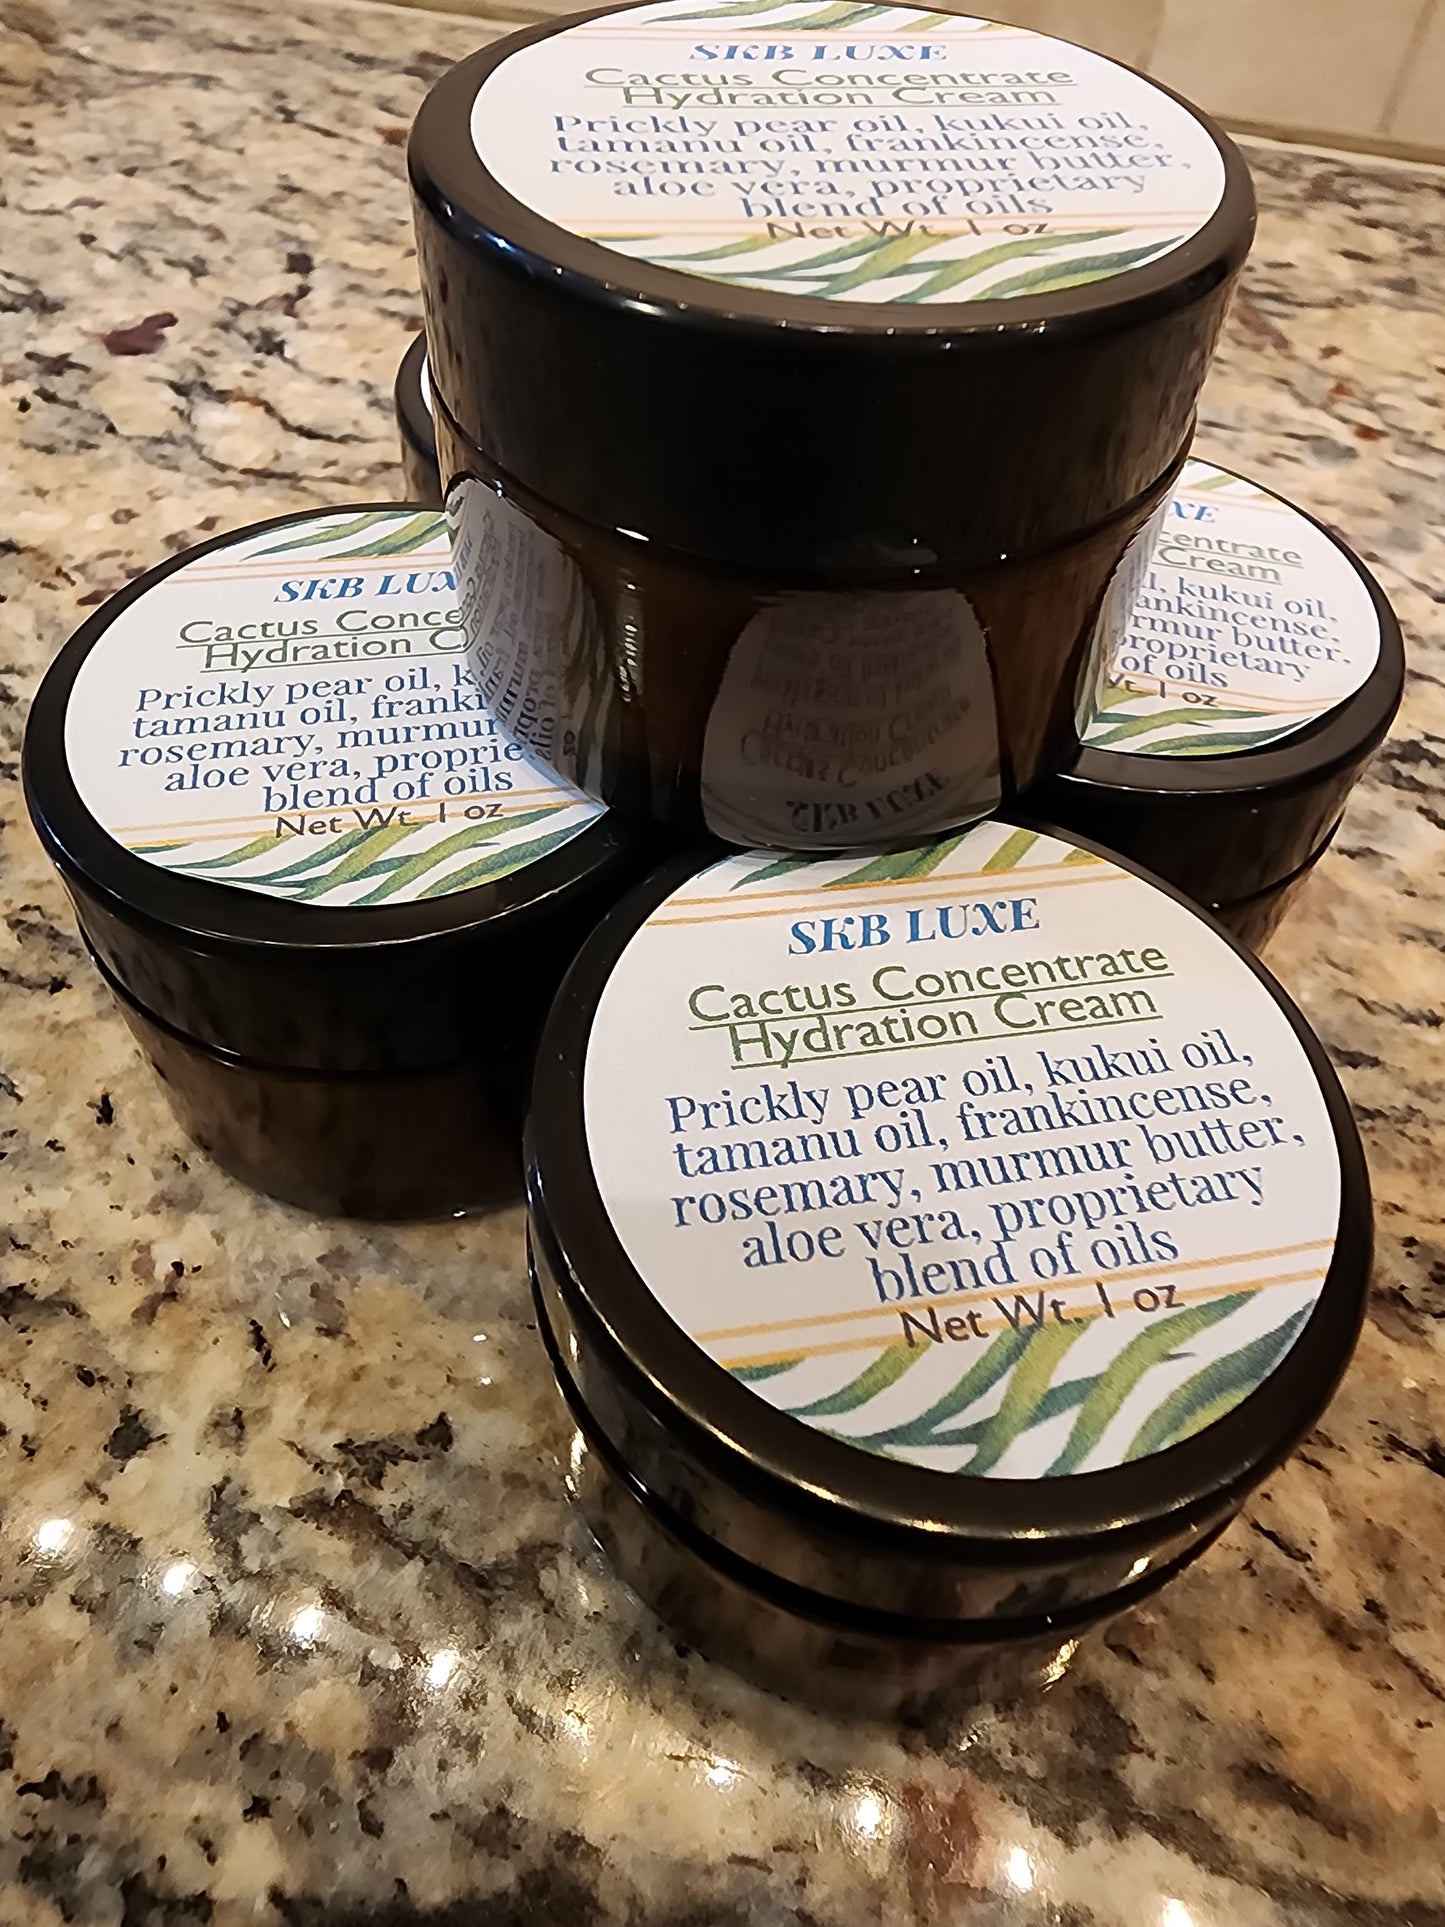 Cactus Concentrate Hydration Cream